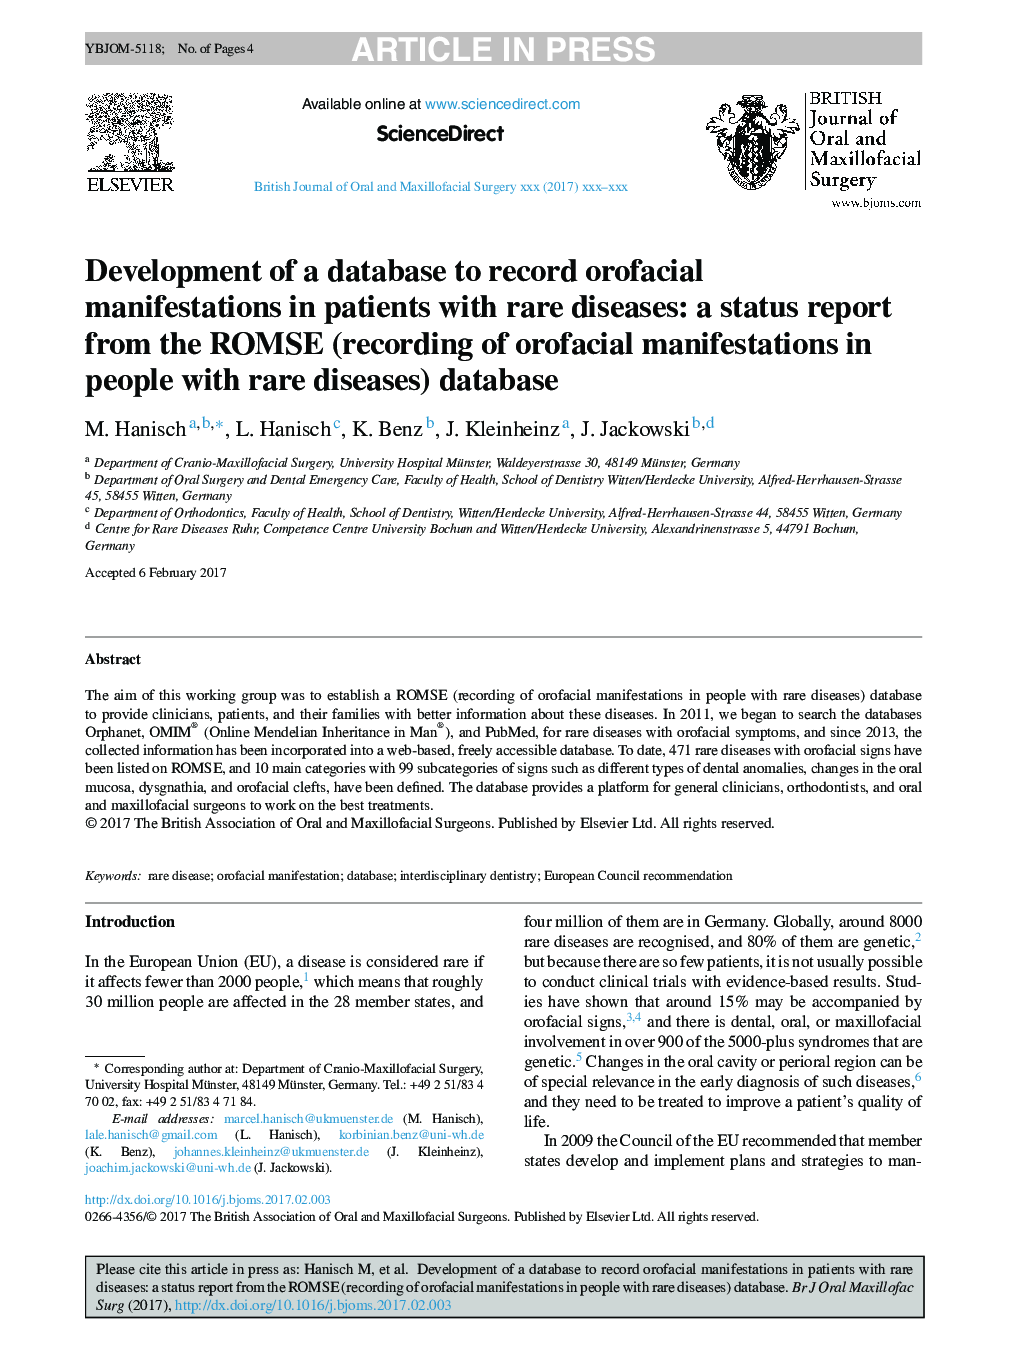 Development of a database to record orofacial manifestations in patients with rare diseases: a status report from the ROMSE (recording of orofacial manifestations in people with rare diseases) database